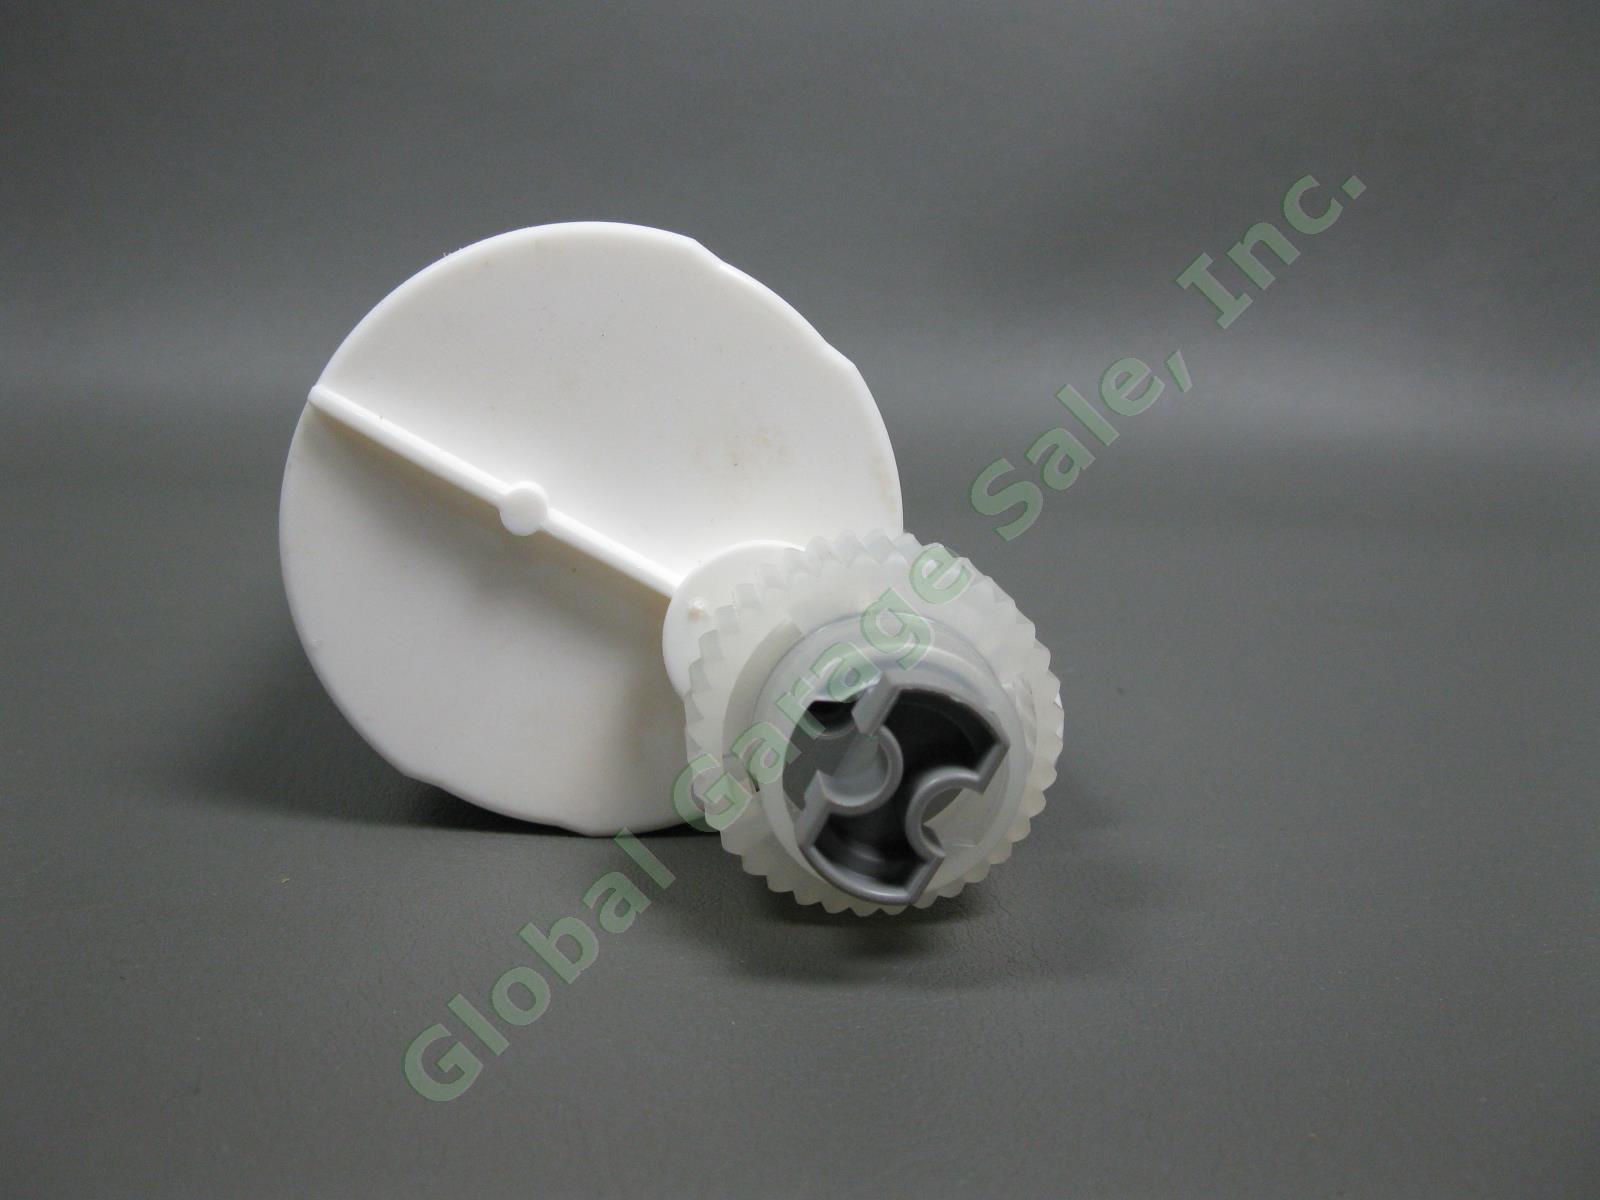 Georg Fischer GF Contain-It System II PVC Bonding Piping Adhesive Cartridge Tube 2